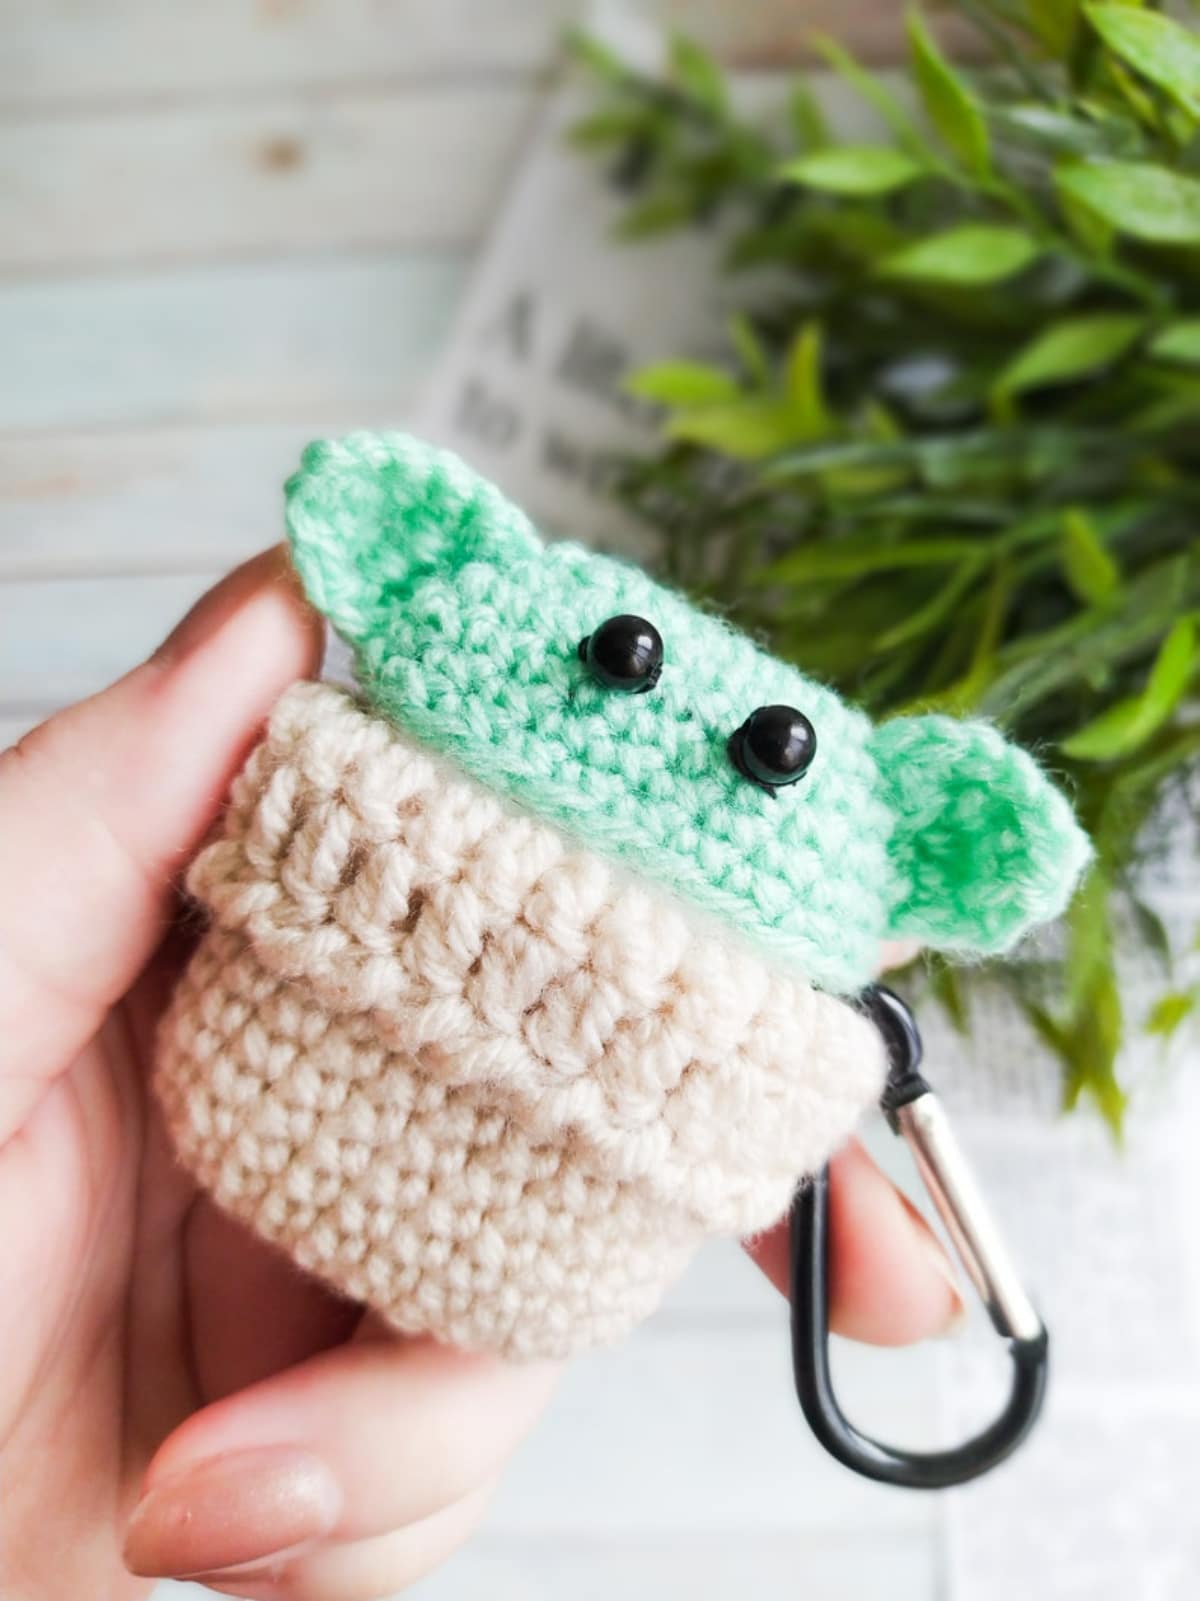 A light green and brown crochet baby Yoda Airpod case held in a hand by some light wooden floor and foliage.